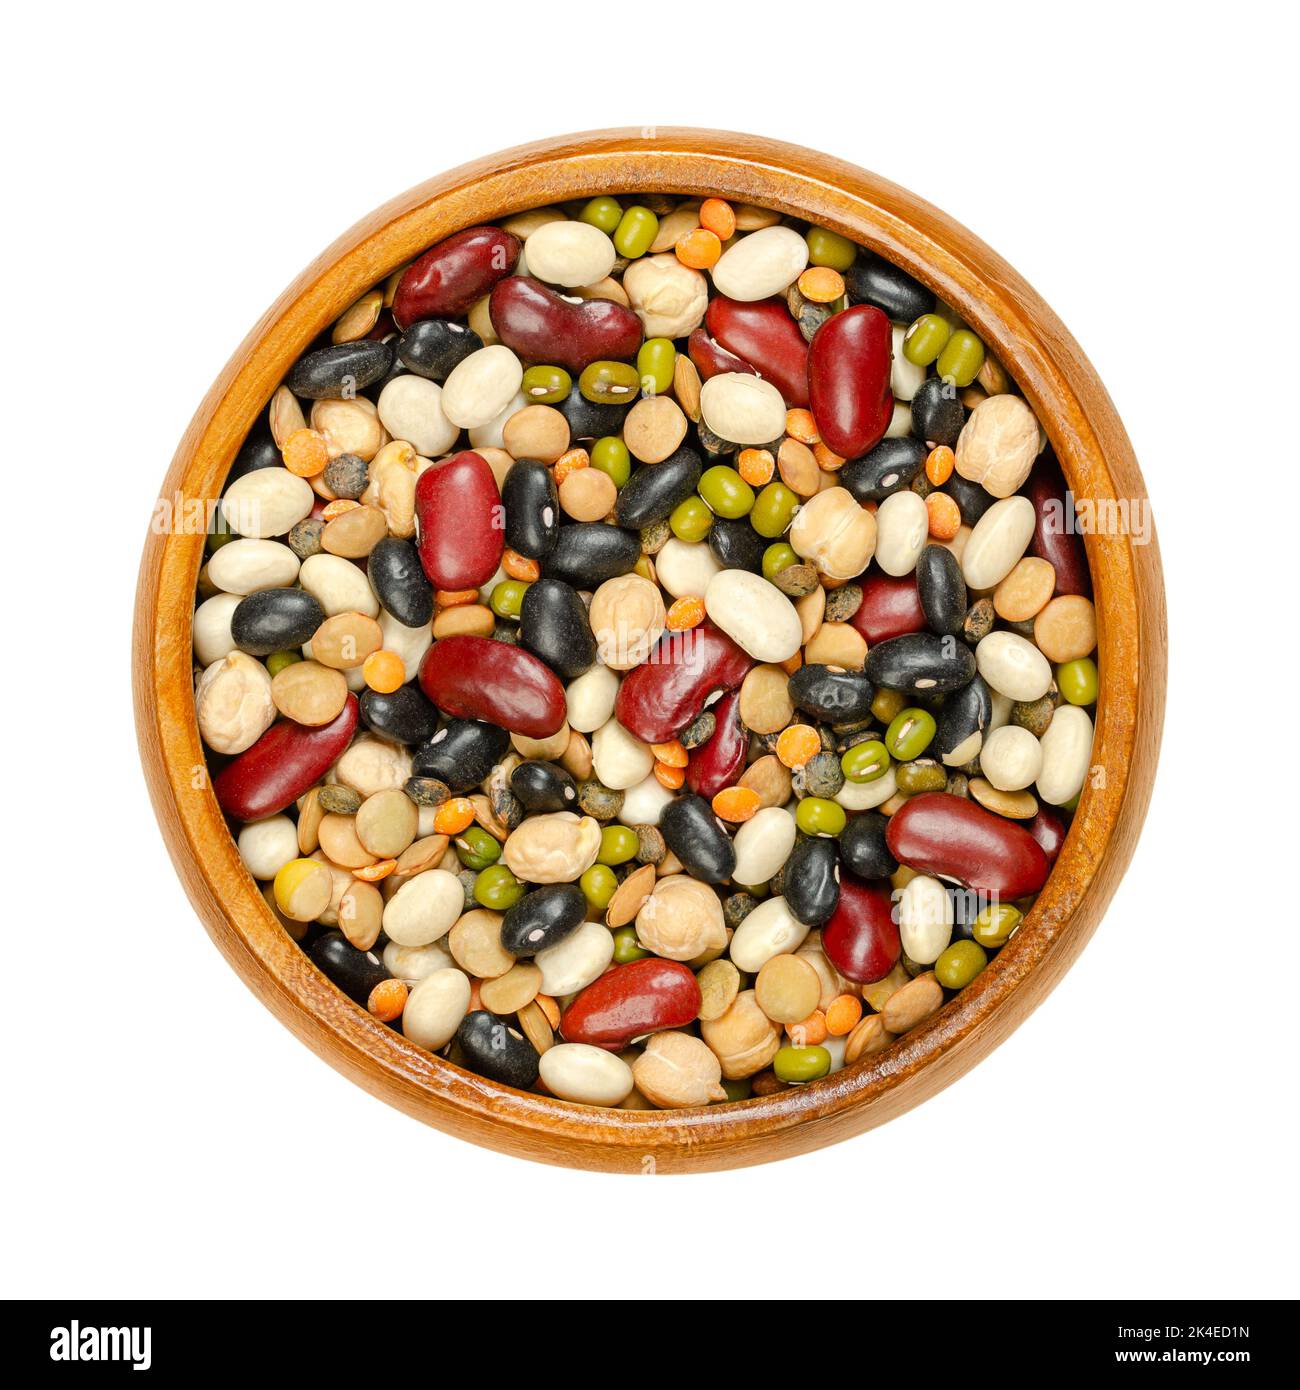 Mixed dried pulses in a wooden bowl, from above. Mix of red kidney, black and white beans, mung beans, brown, green and red lentils, and chickpeas. Stock Photo